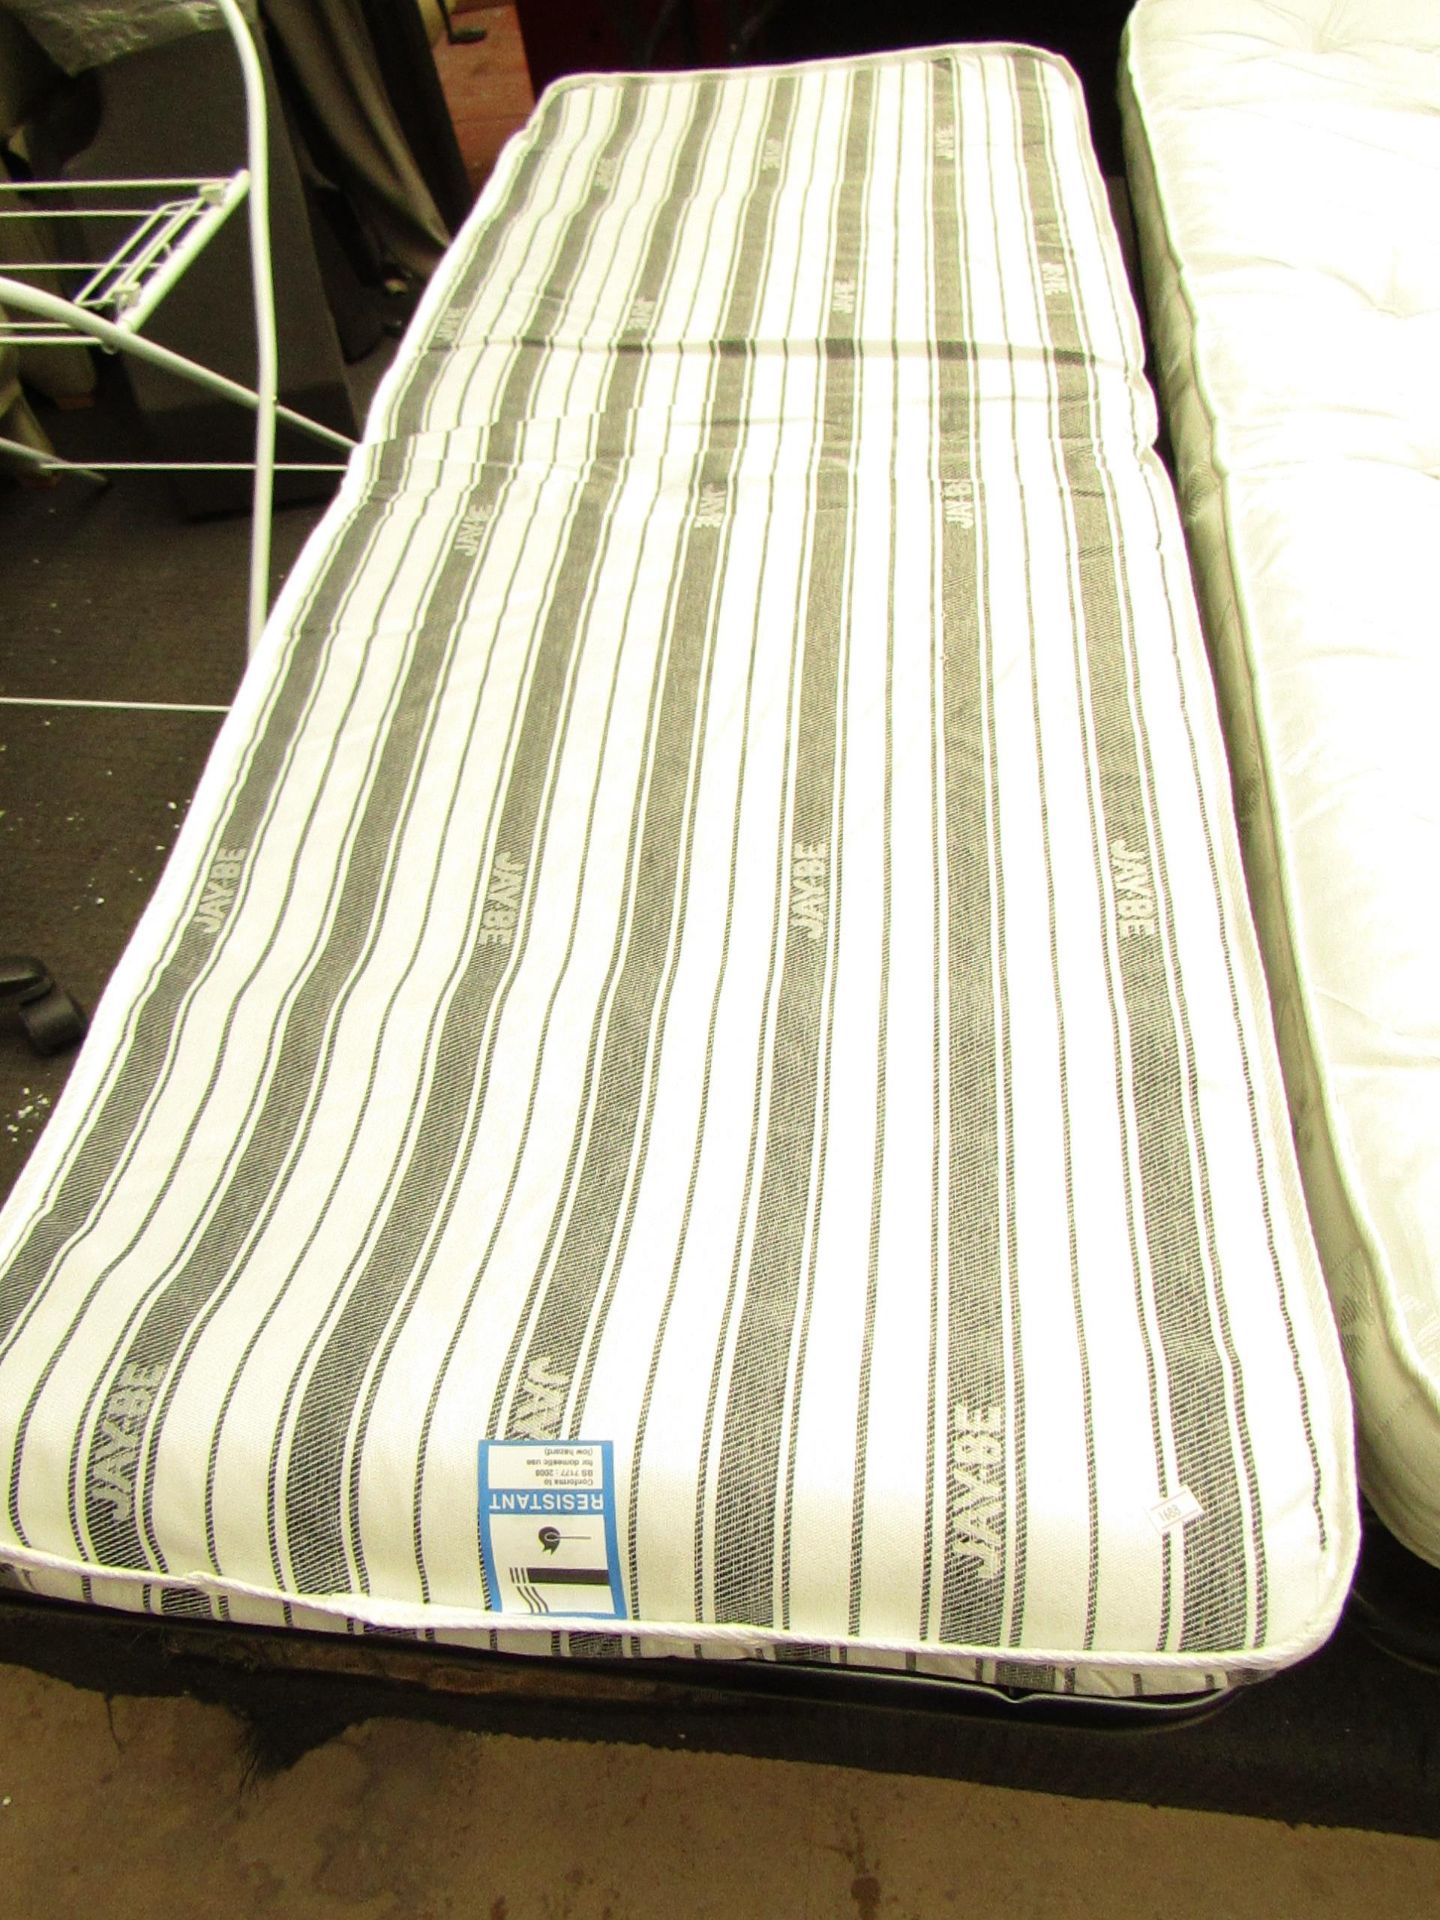 Jay be FoldingBed with Striped Mattress, boxed but upon quick inspection looks to be in good